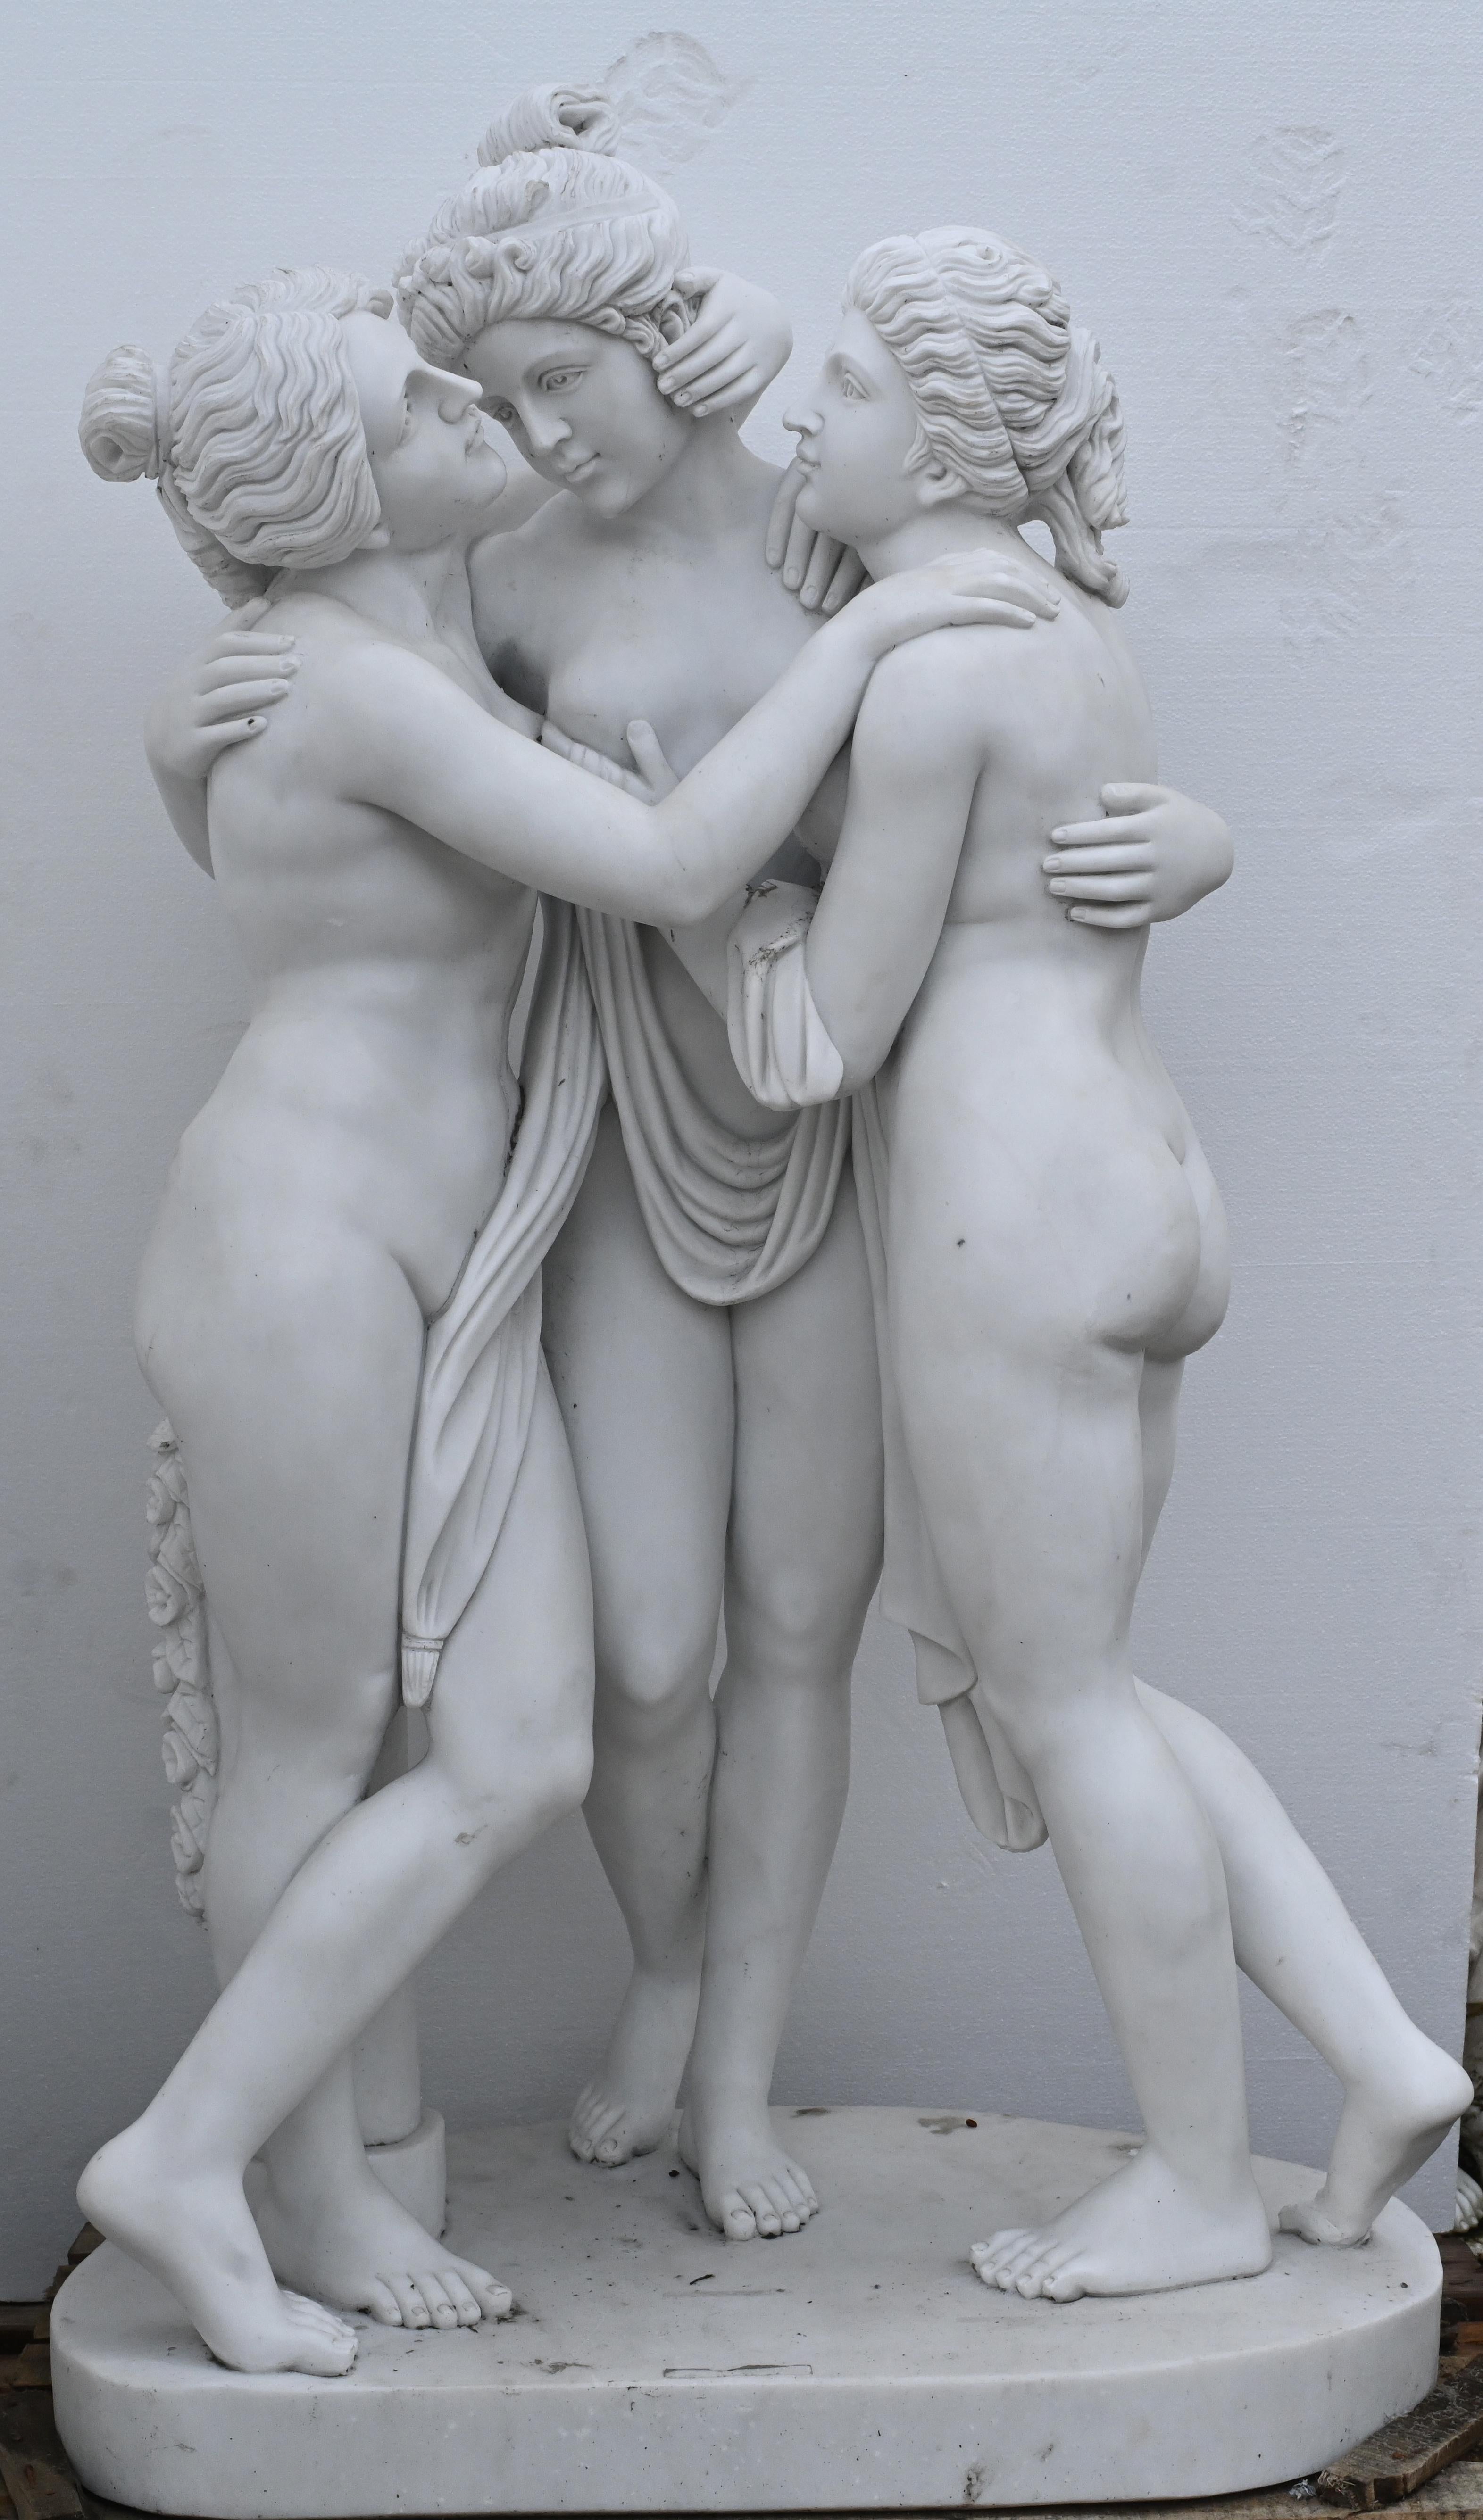 You are viewing an exquisite rendition of the Three Graces statue 
The original was carved in Rome by Antonio Canova (1814 – 17)
The subject is taken from Greek myth and depicts the three daughters of Zeus
From left to right - Euphrosyne (mirth),